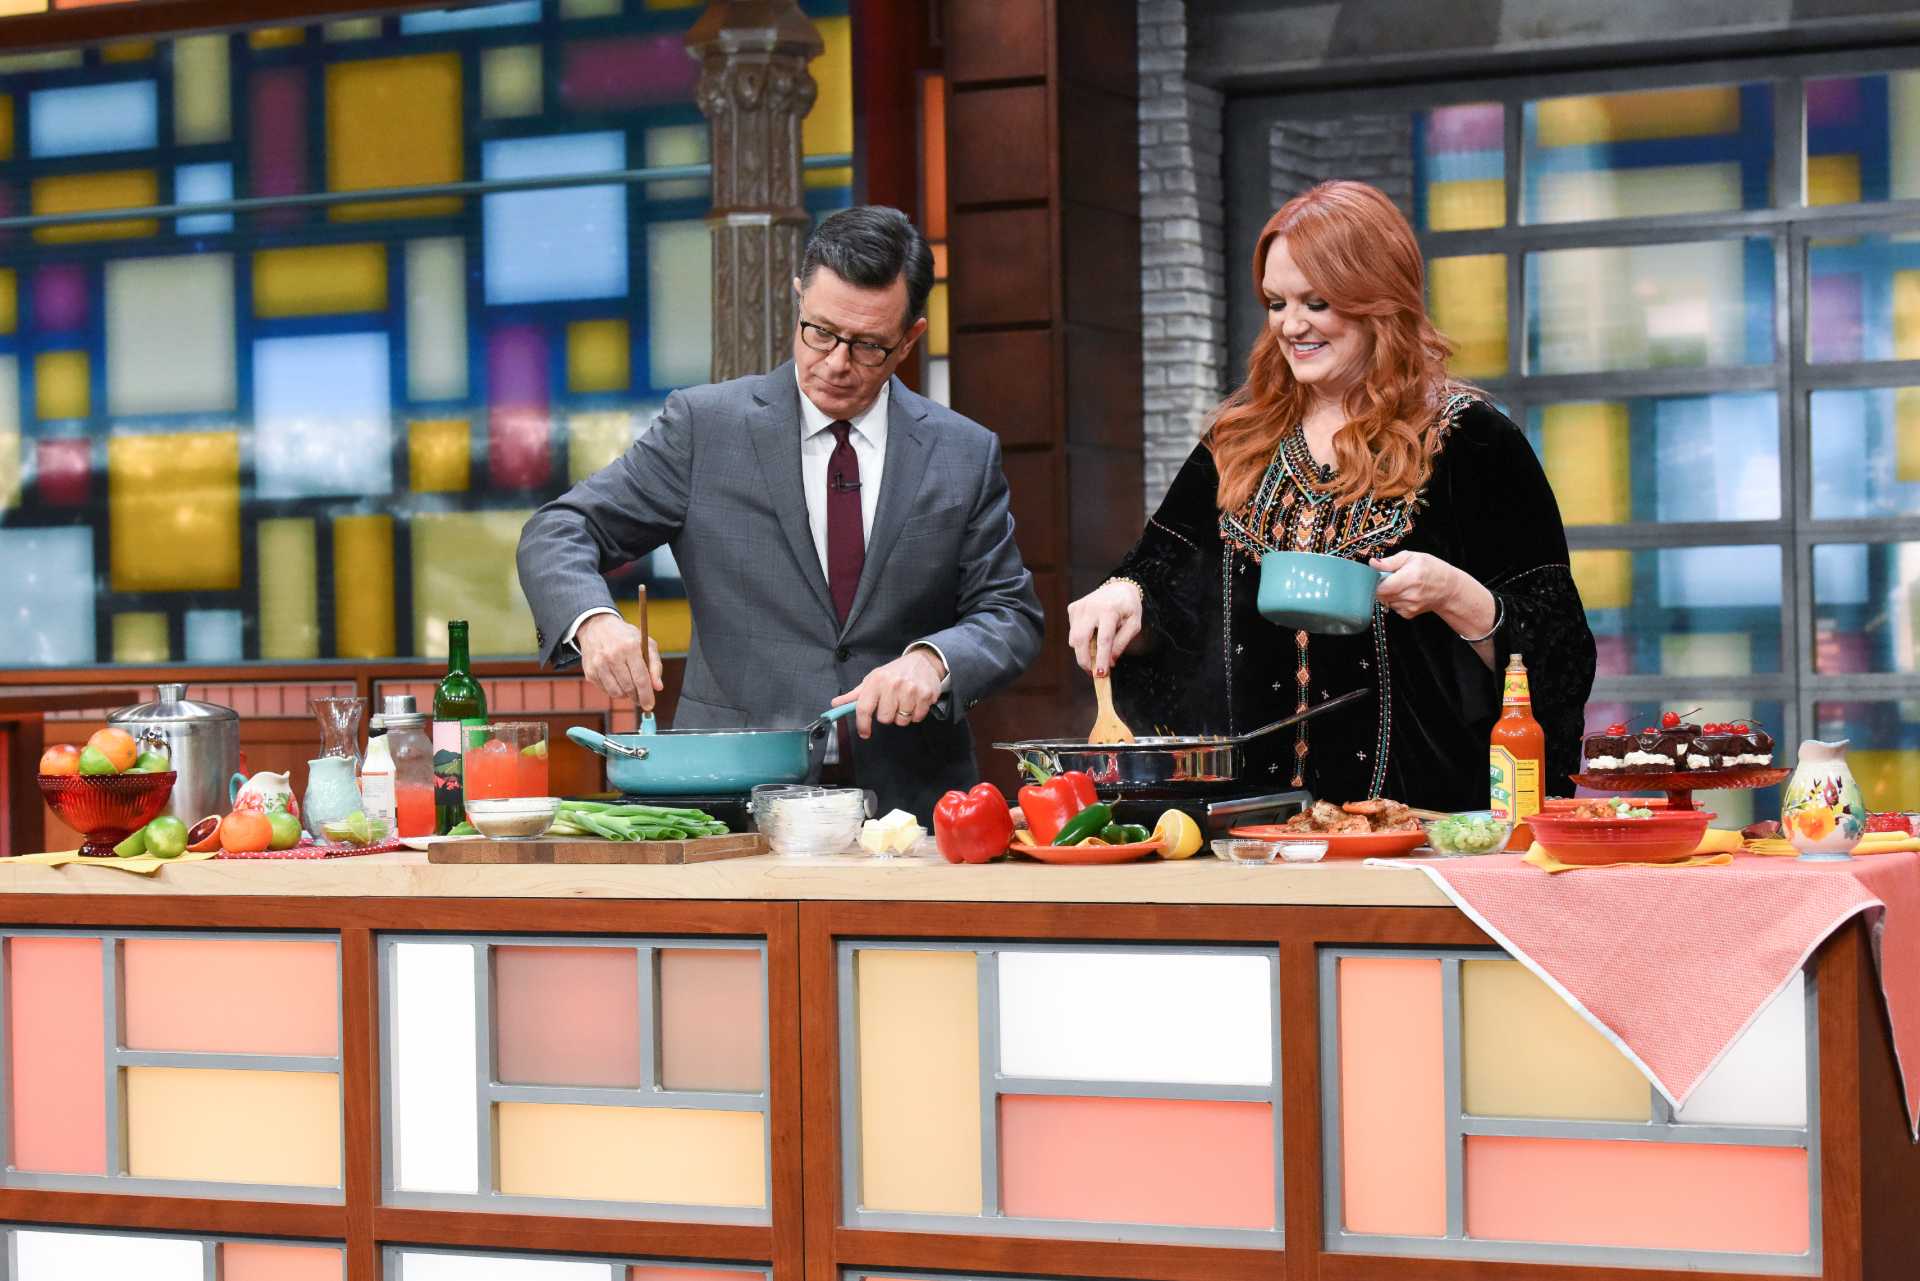 Ree Drummond and Stephen Colbert make one of her recipes on a Late Late Show cooking segment